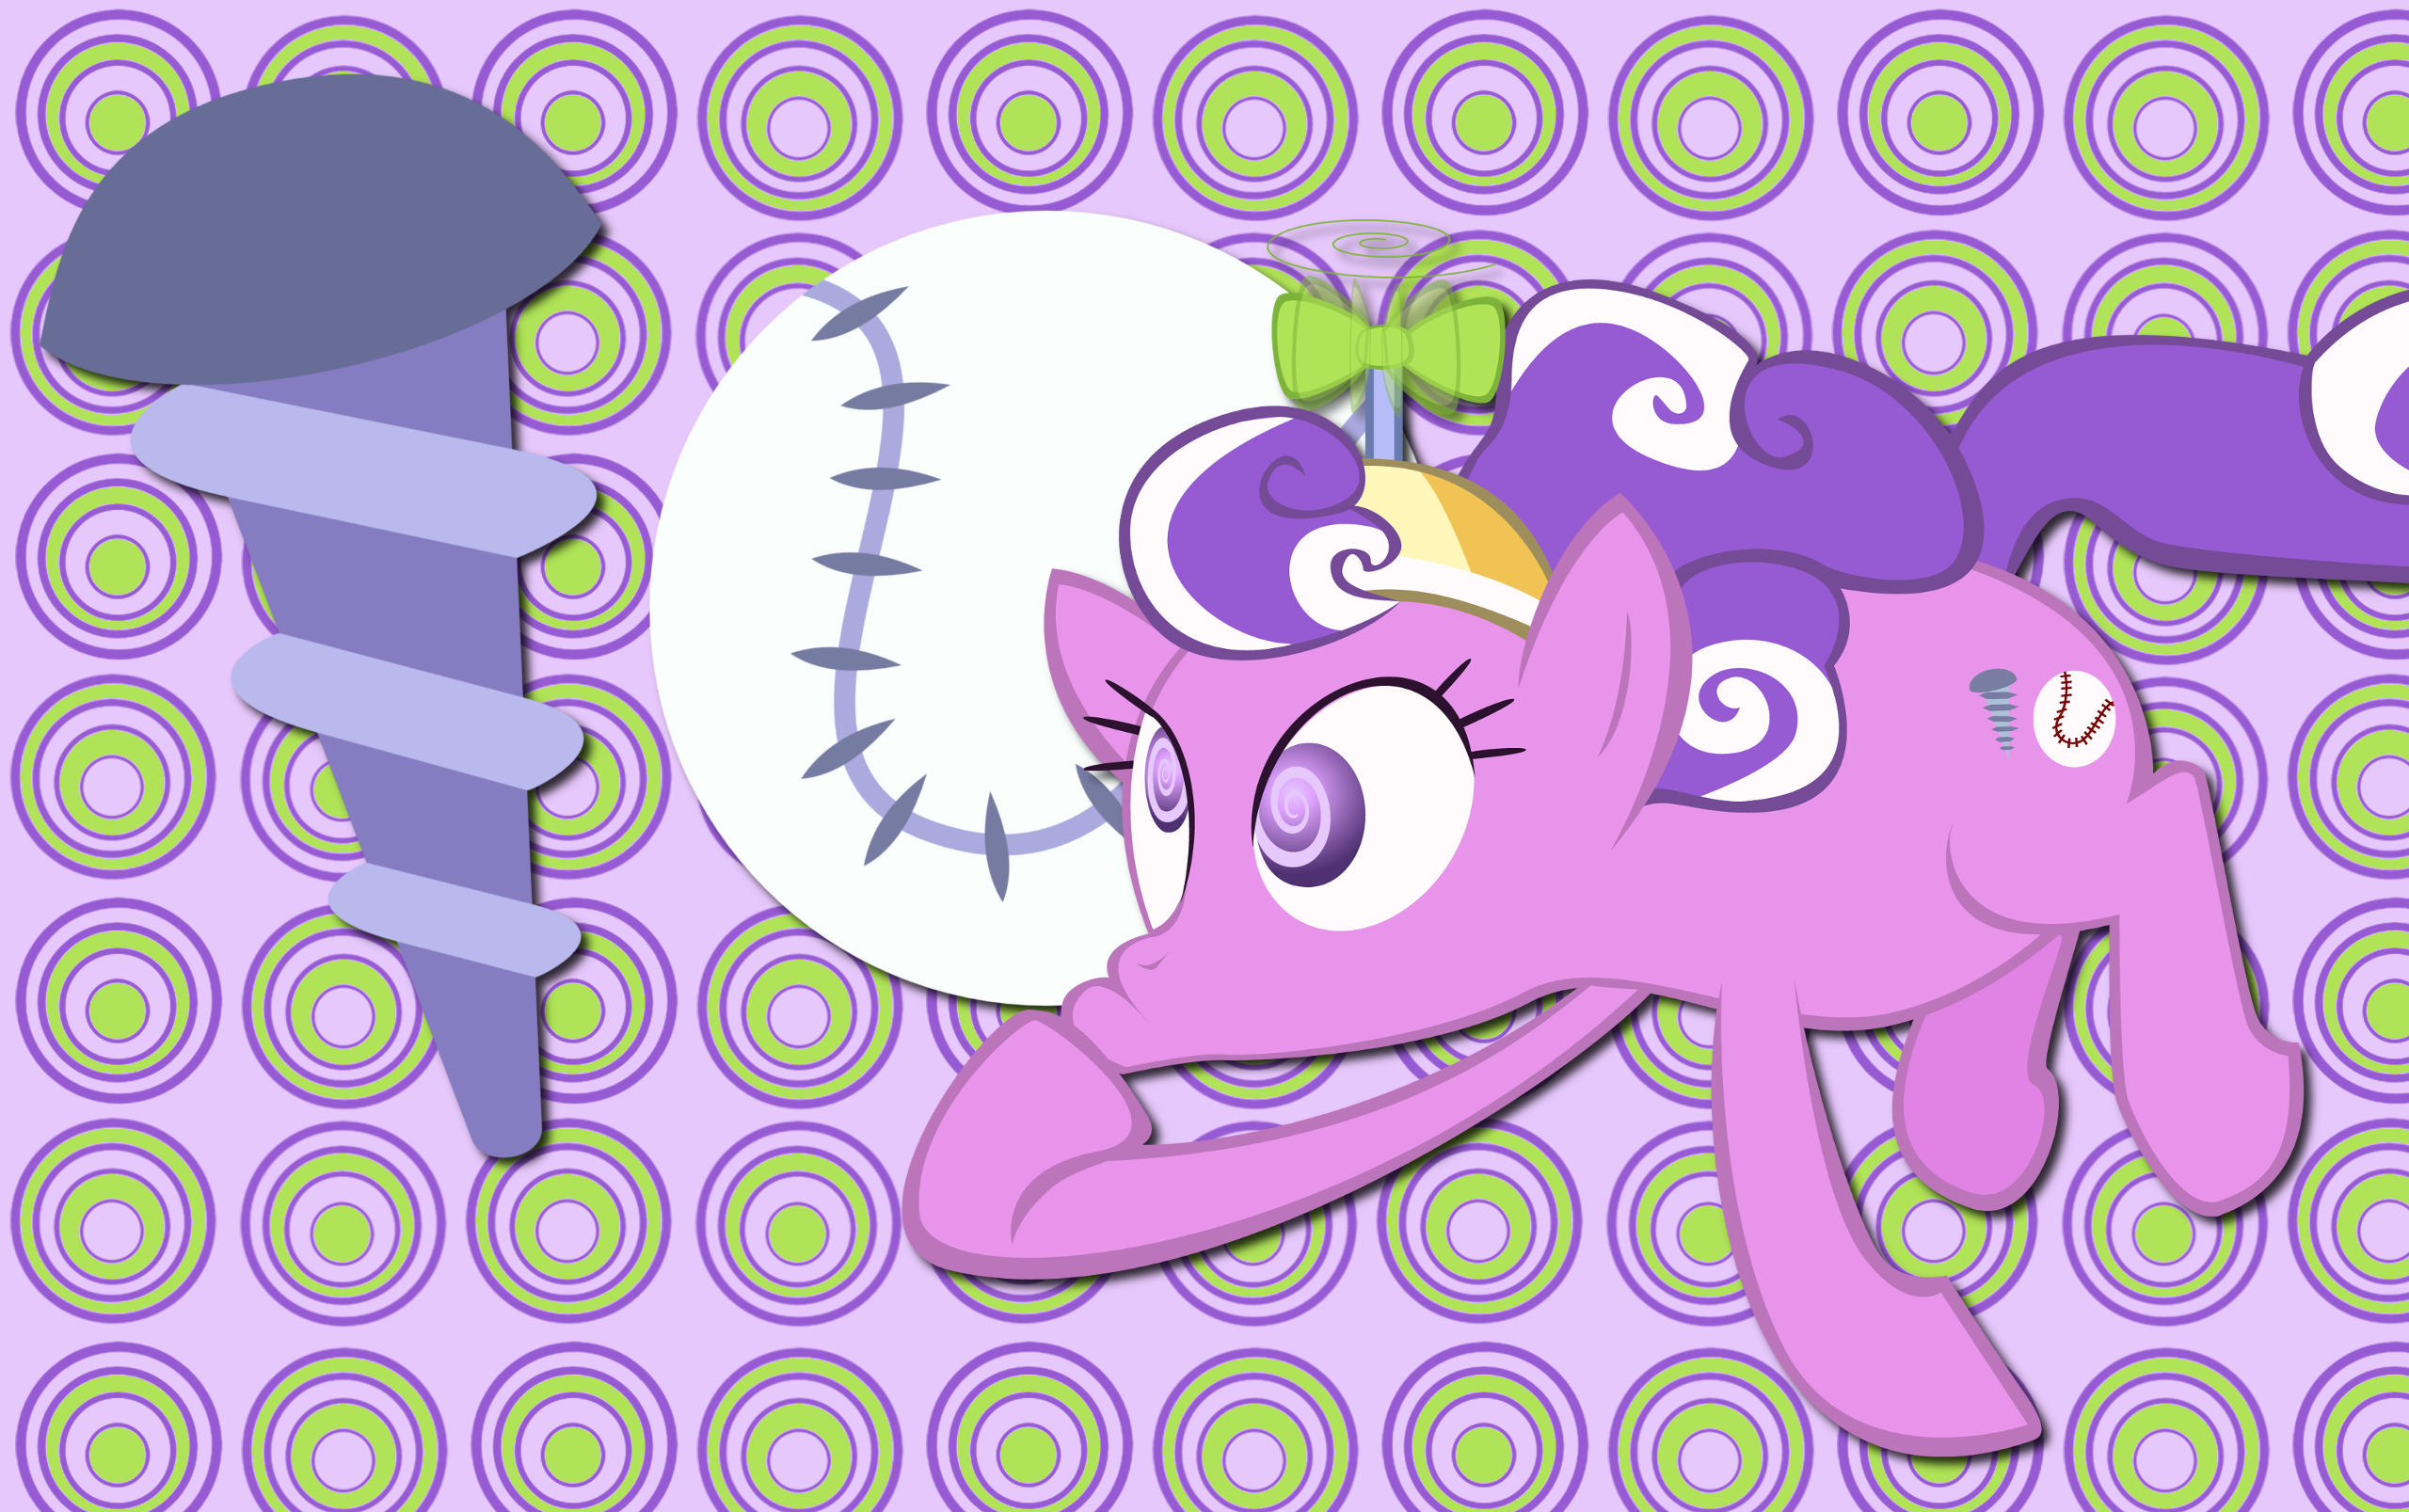 Screw Ball wallpaper by AliceHumanSacrifice0, Heart-Of-Stitches and The-Smiling-Pony